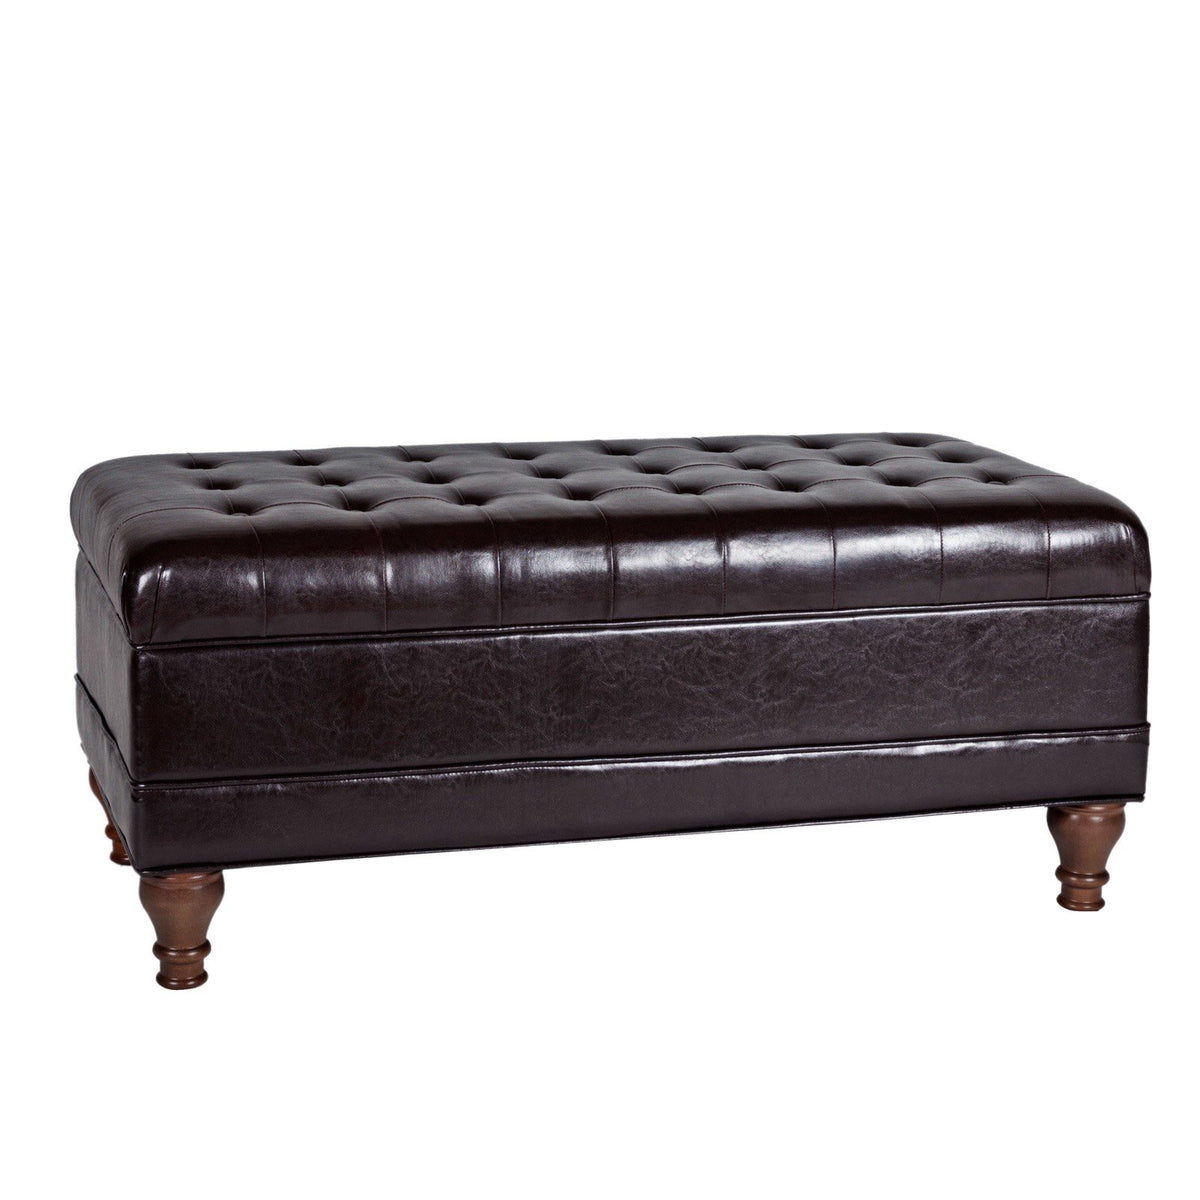 BM194097 - Leatherette Upholstered Wooden Bench with Button Tufted Lift Top Storage, Brown